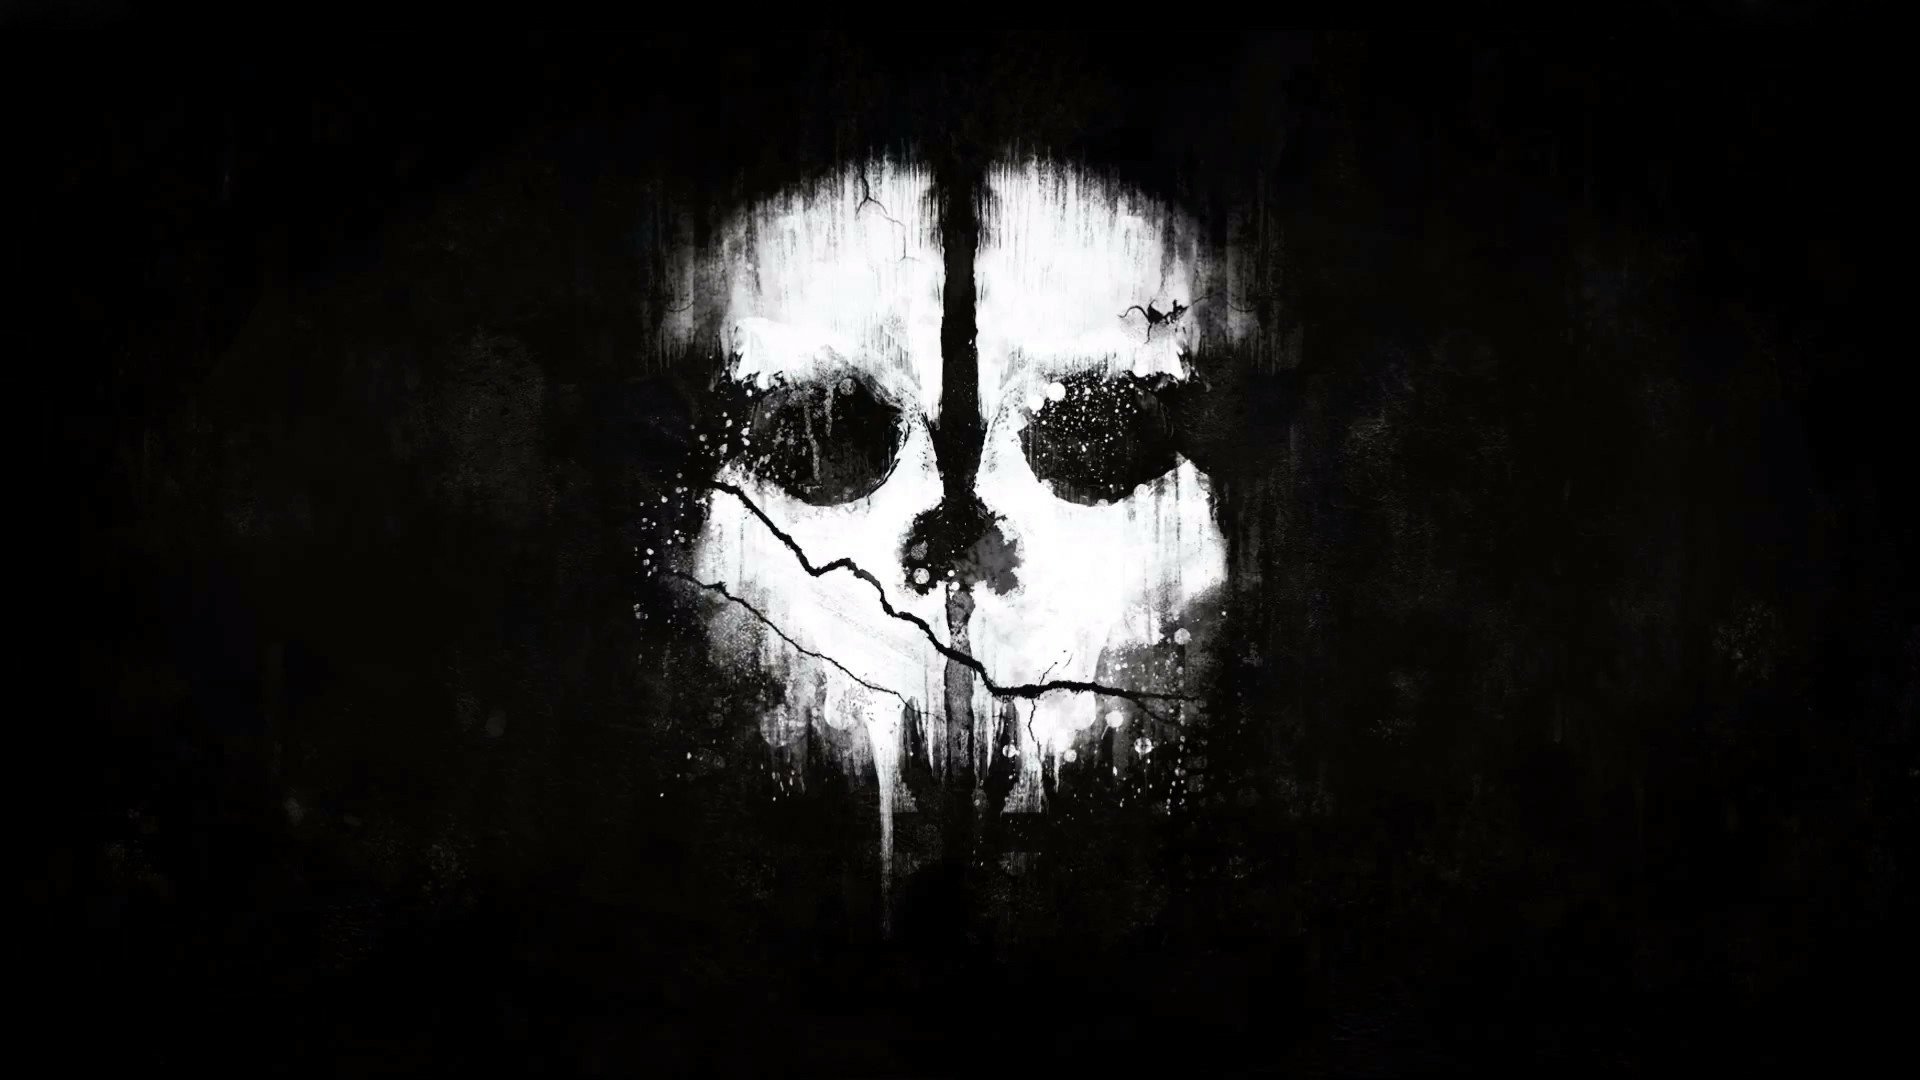 call of duty ghosts wallpaper hd 1080p